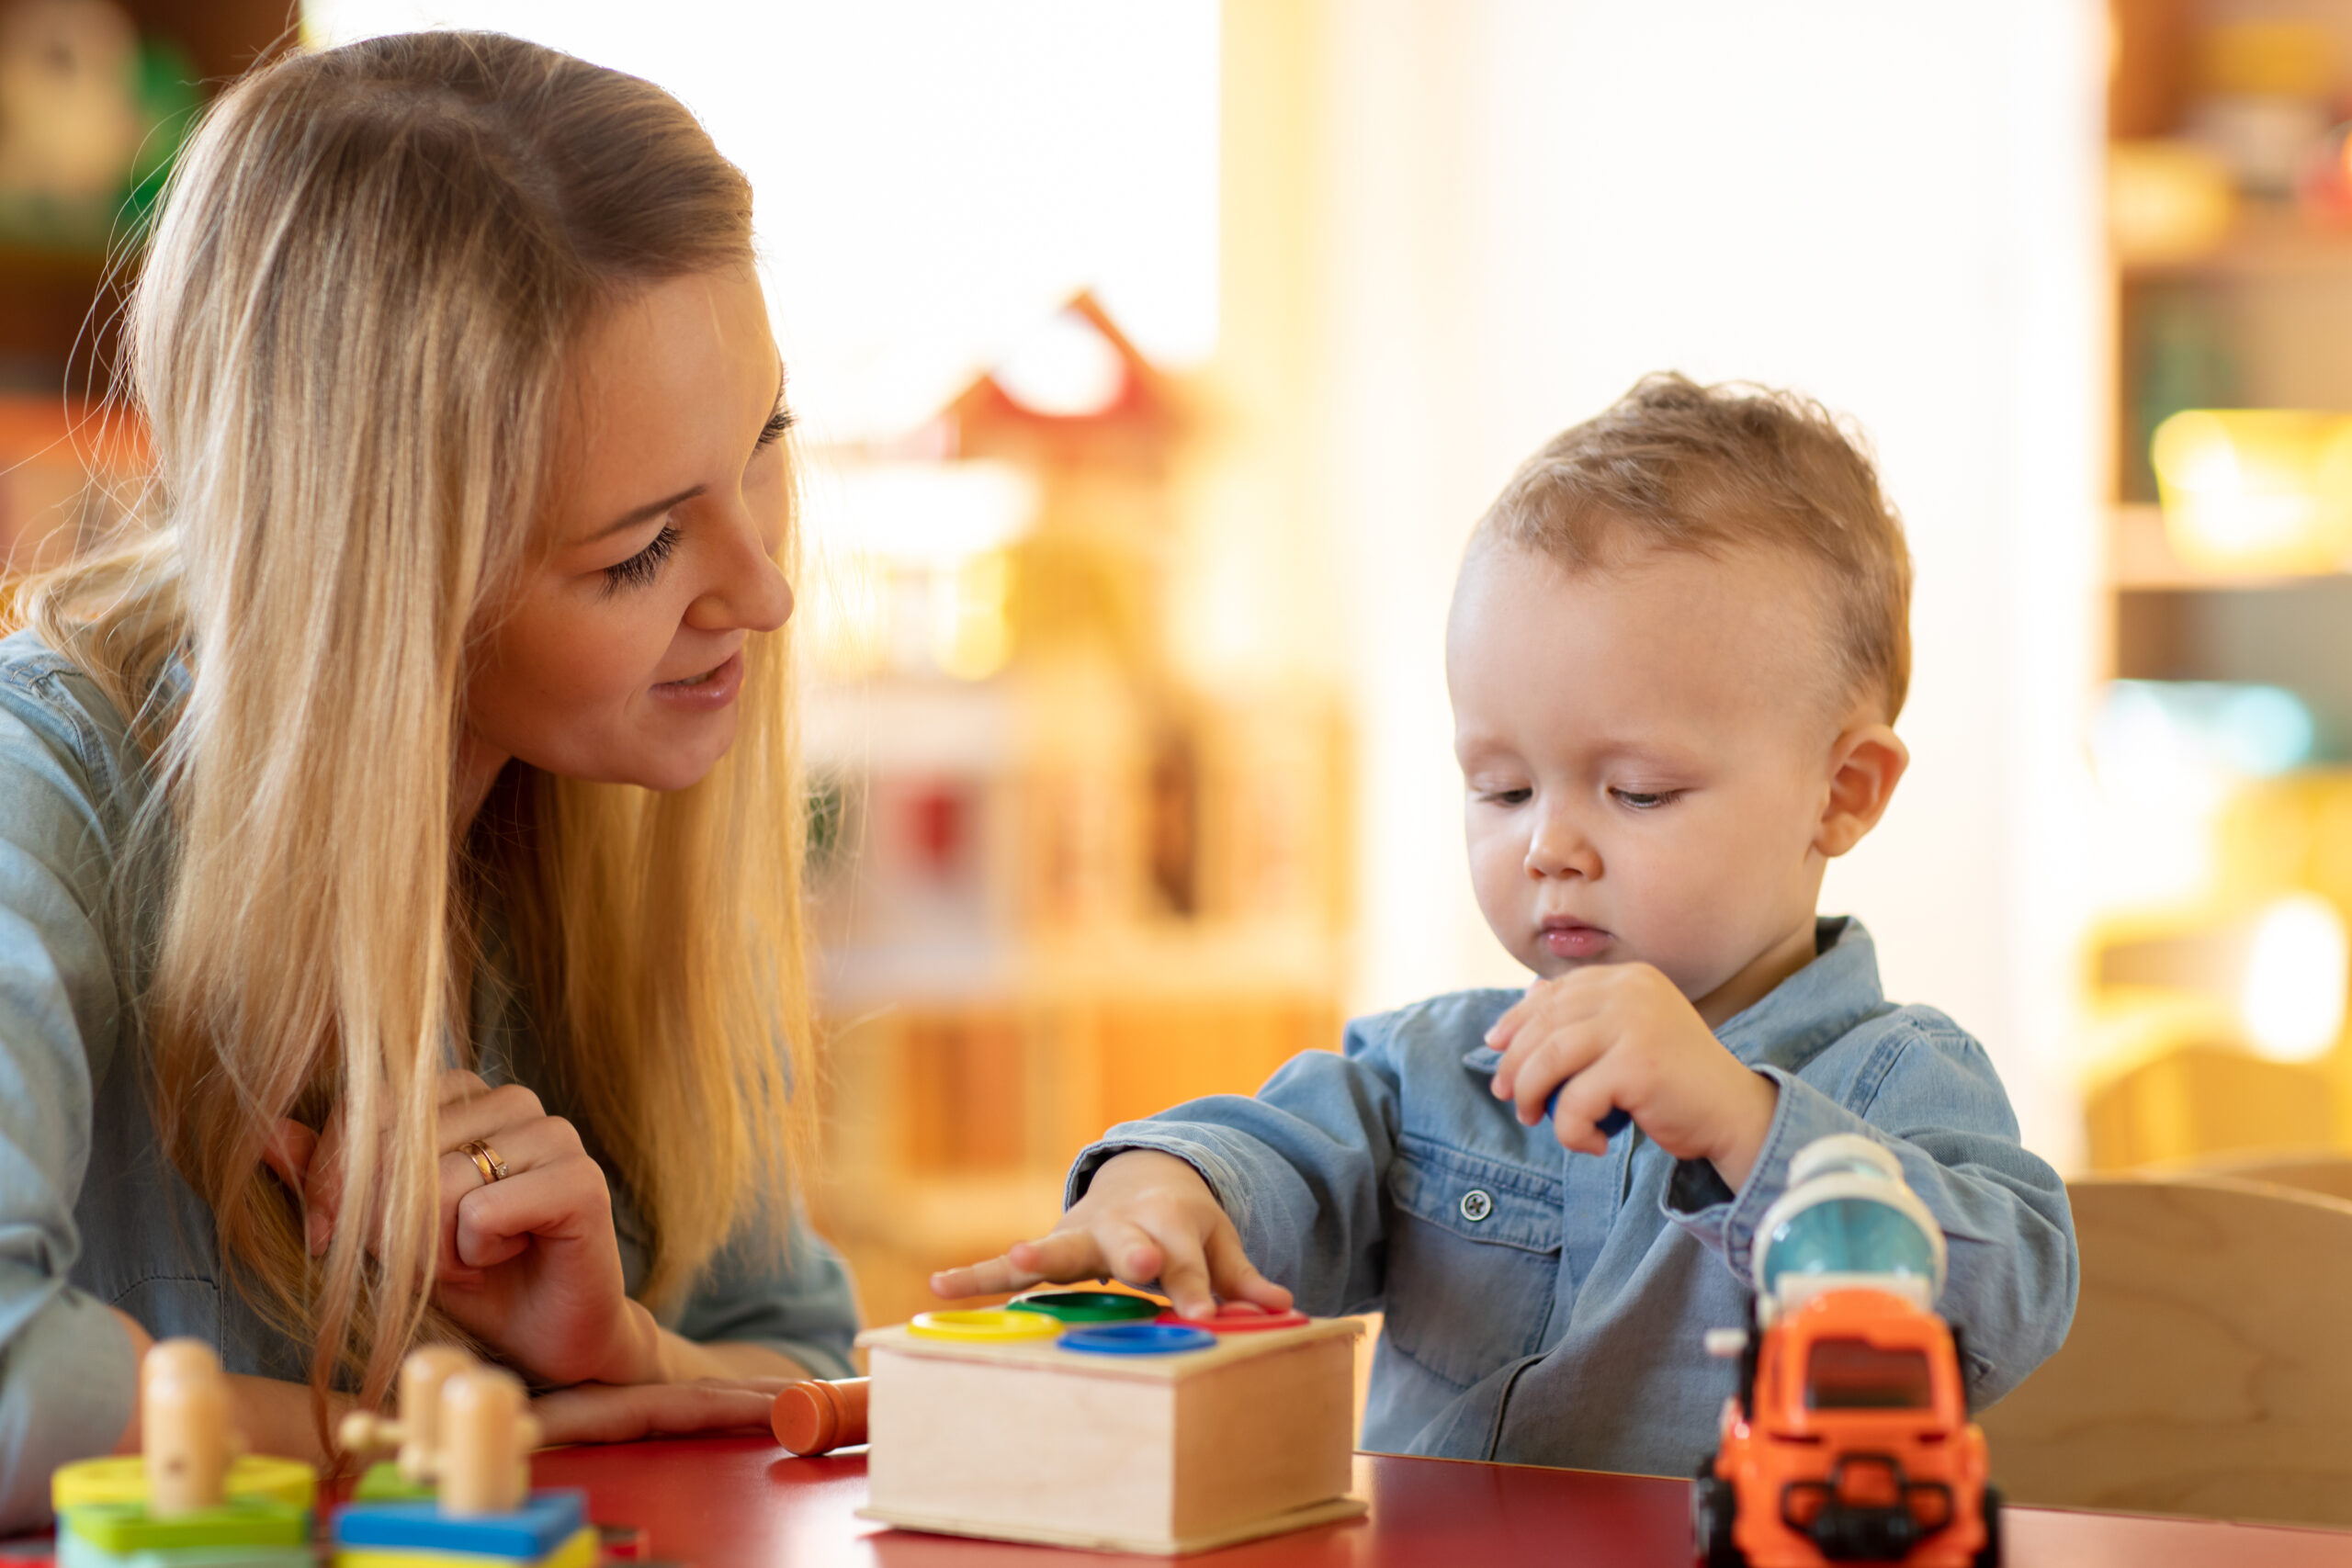 Certificate in Working with Children and In Early Years Primary Settings